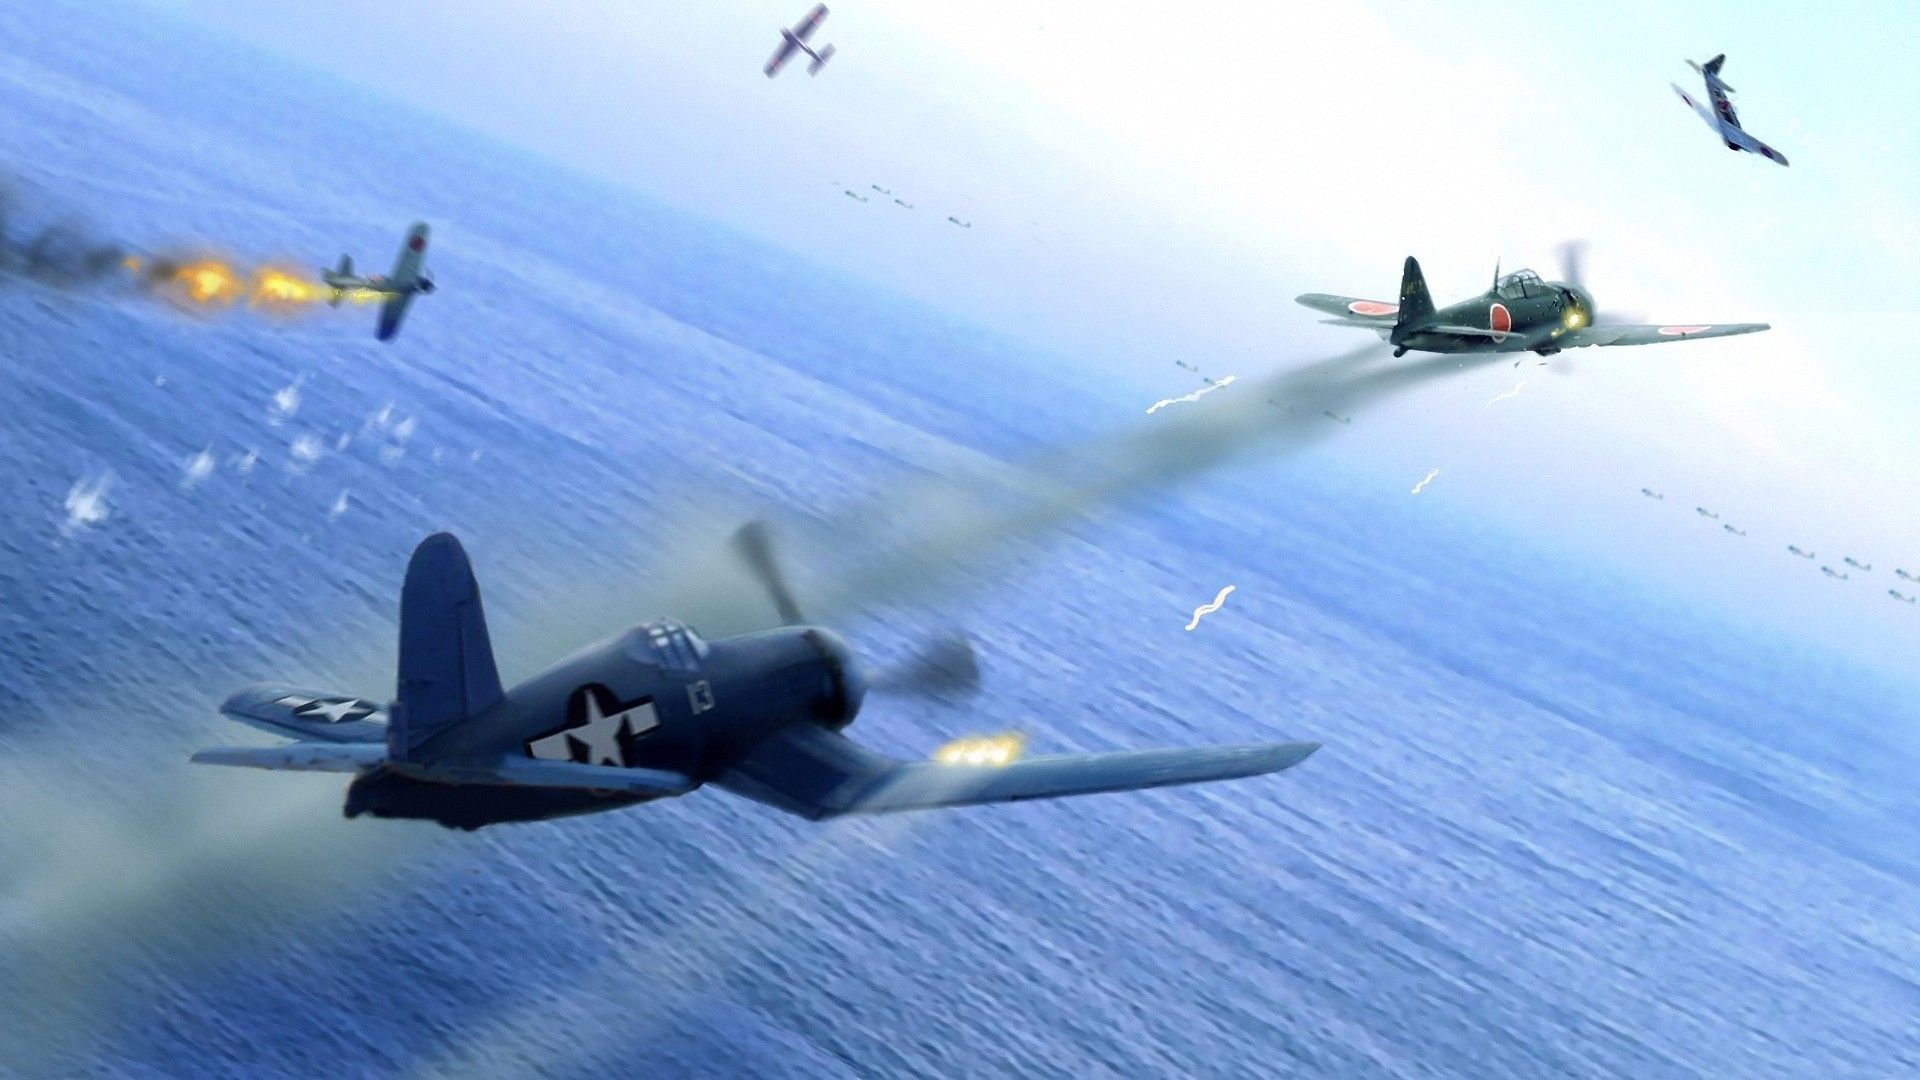 Dogfight wallpaper and image, picture, photo